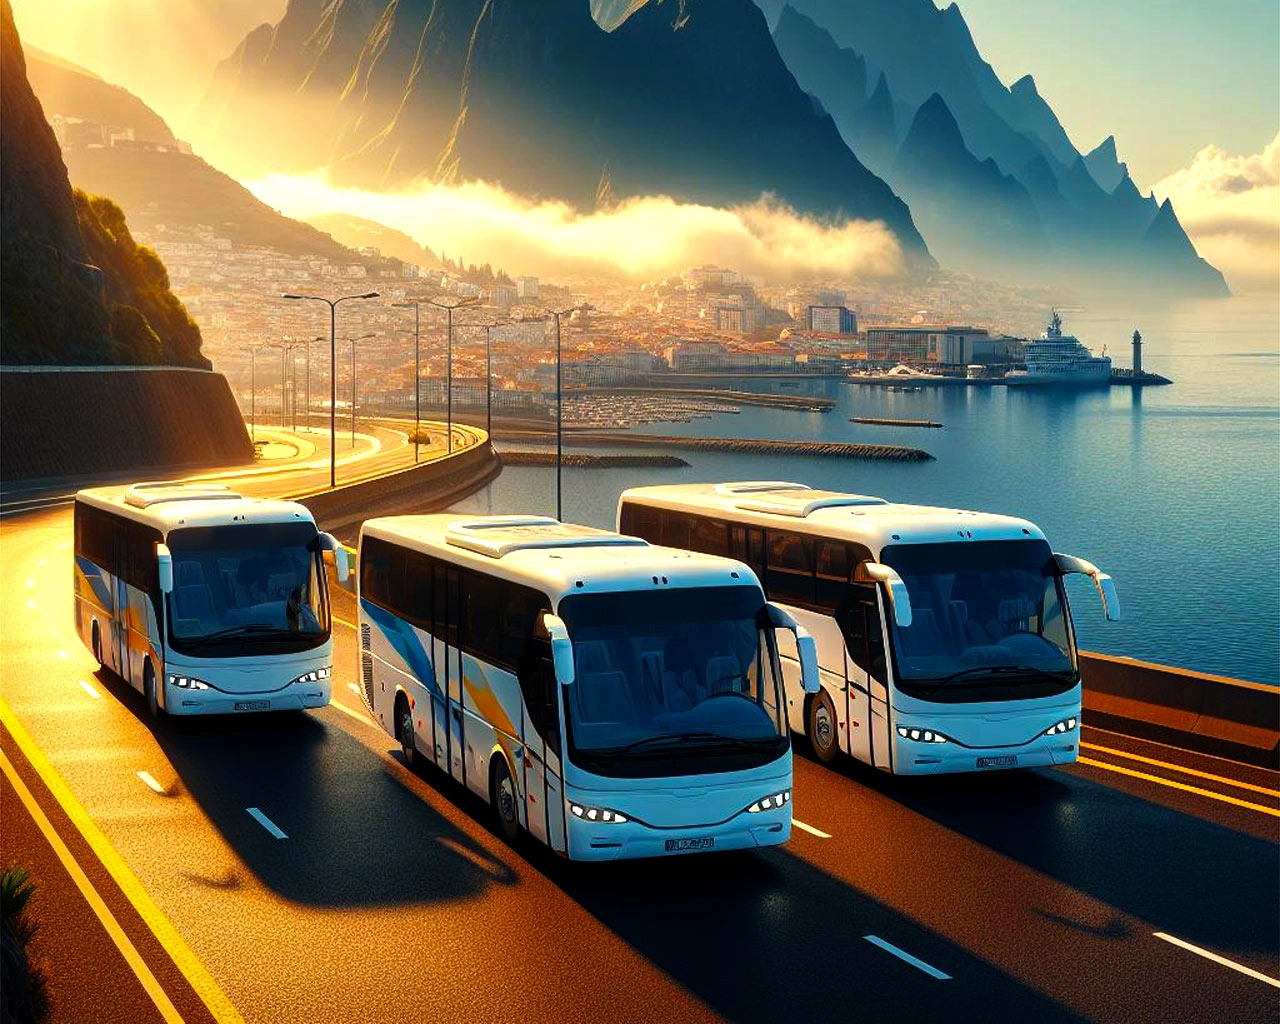 First New Iveco Buses Deployed In Madeira